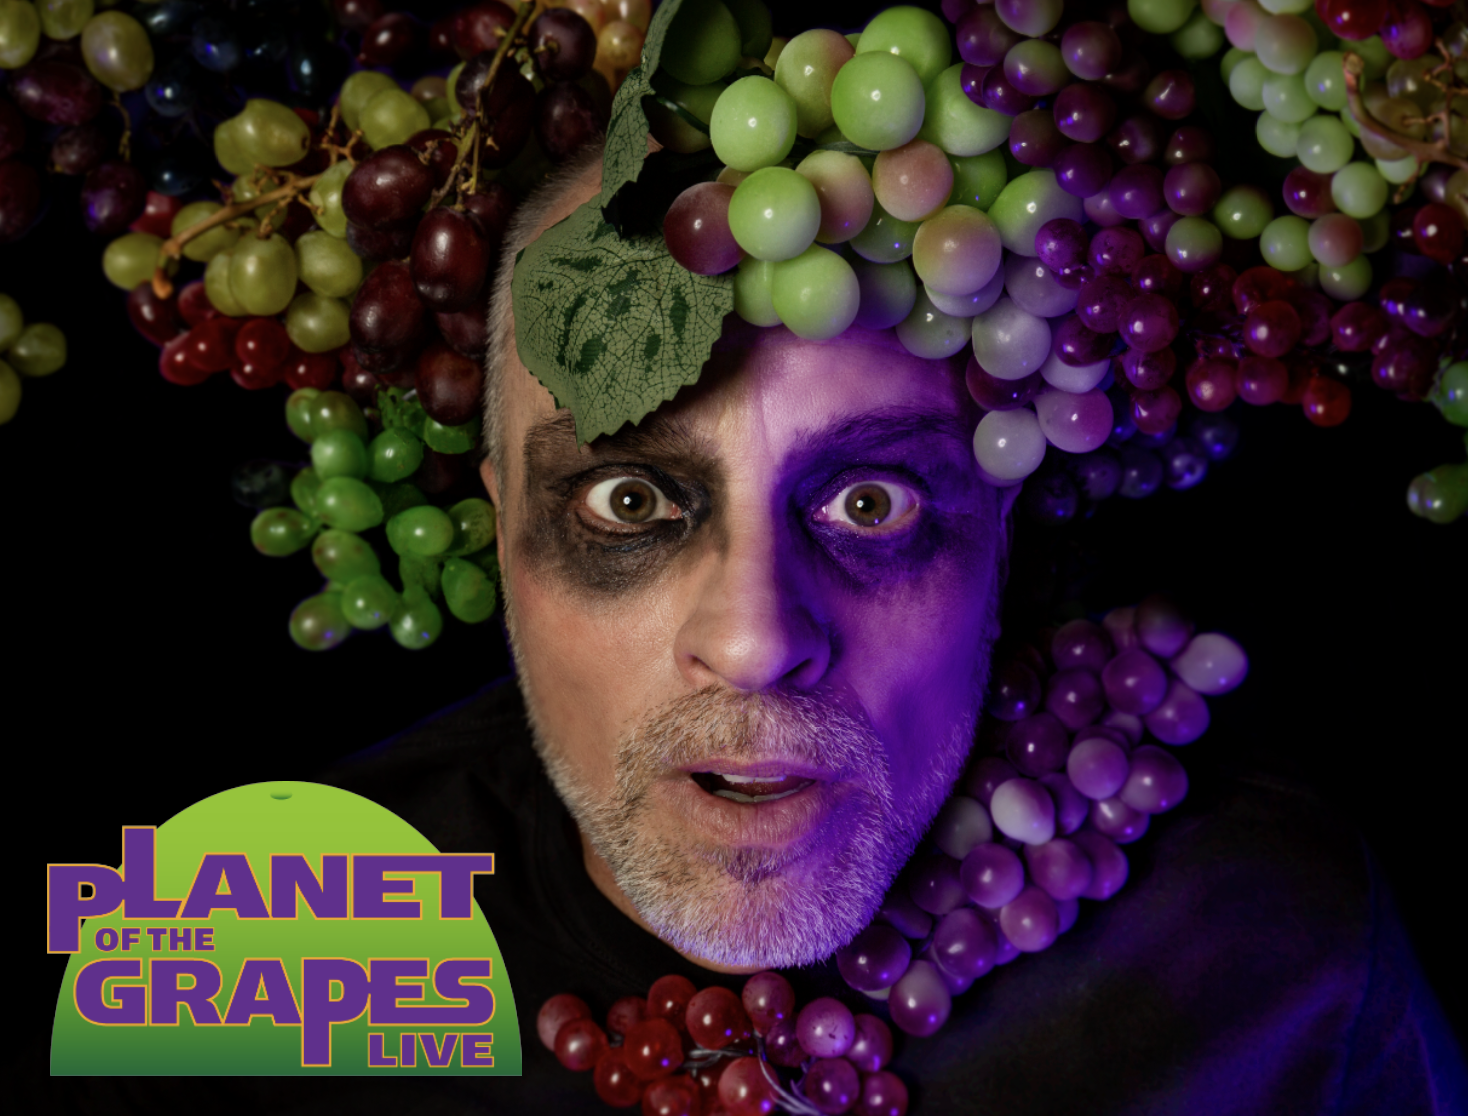 Planet of the Grapes Live - An Epic Sci-Fi Toy Theater Parody